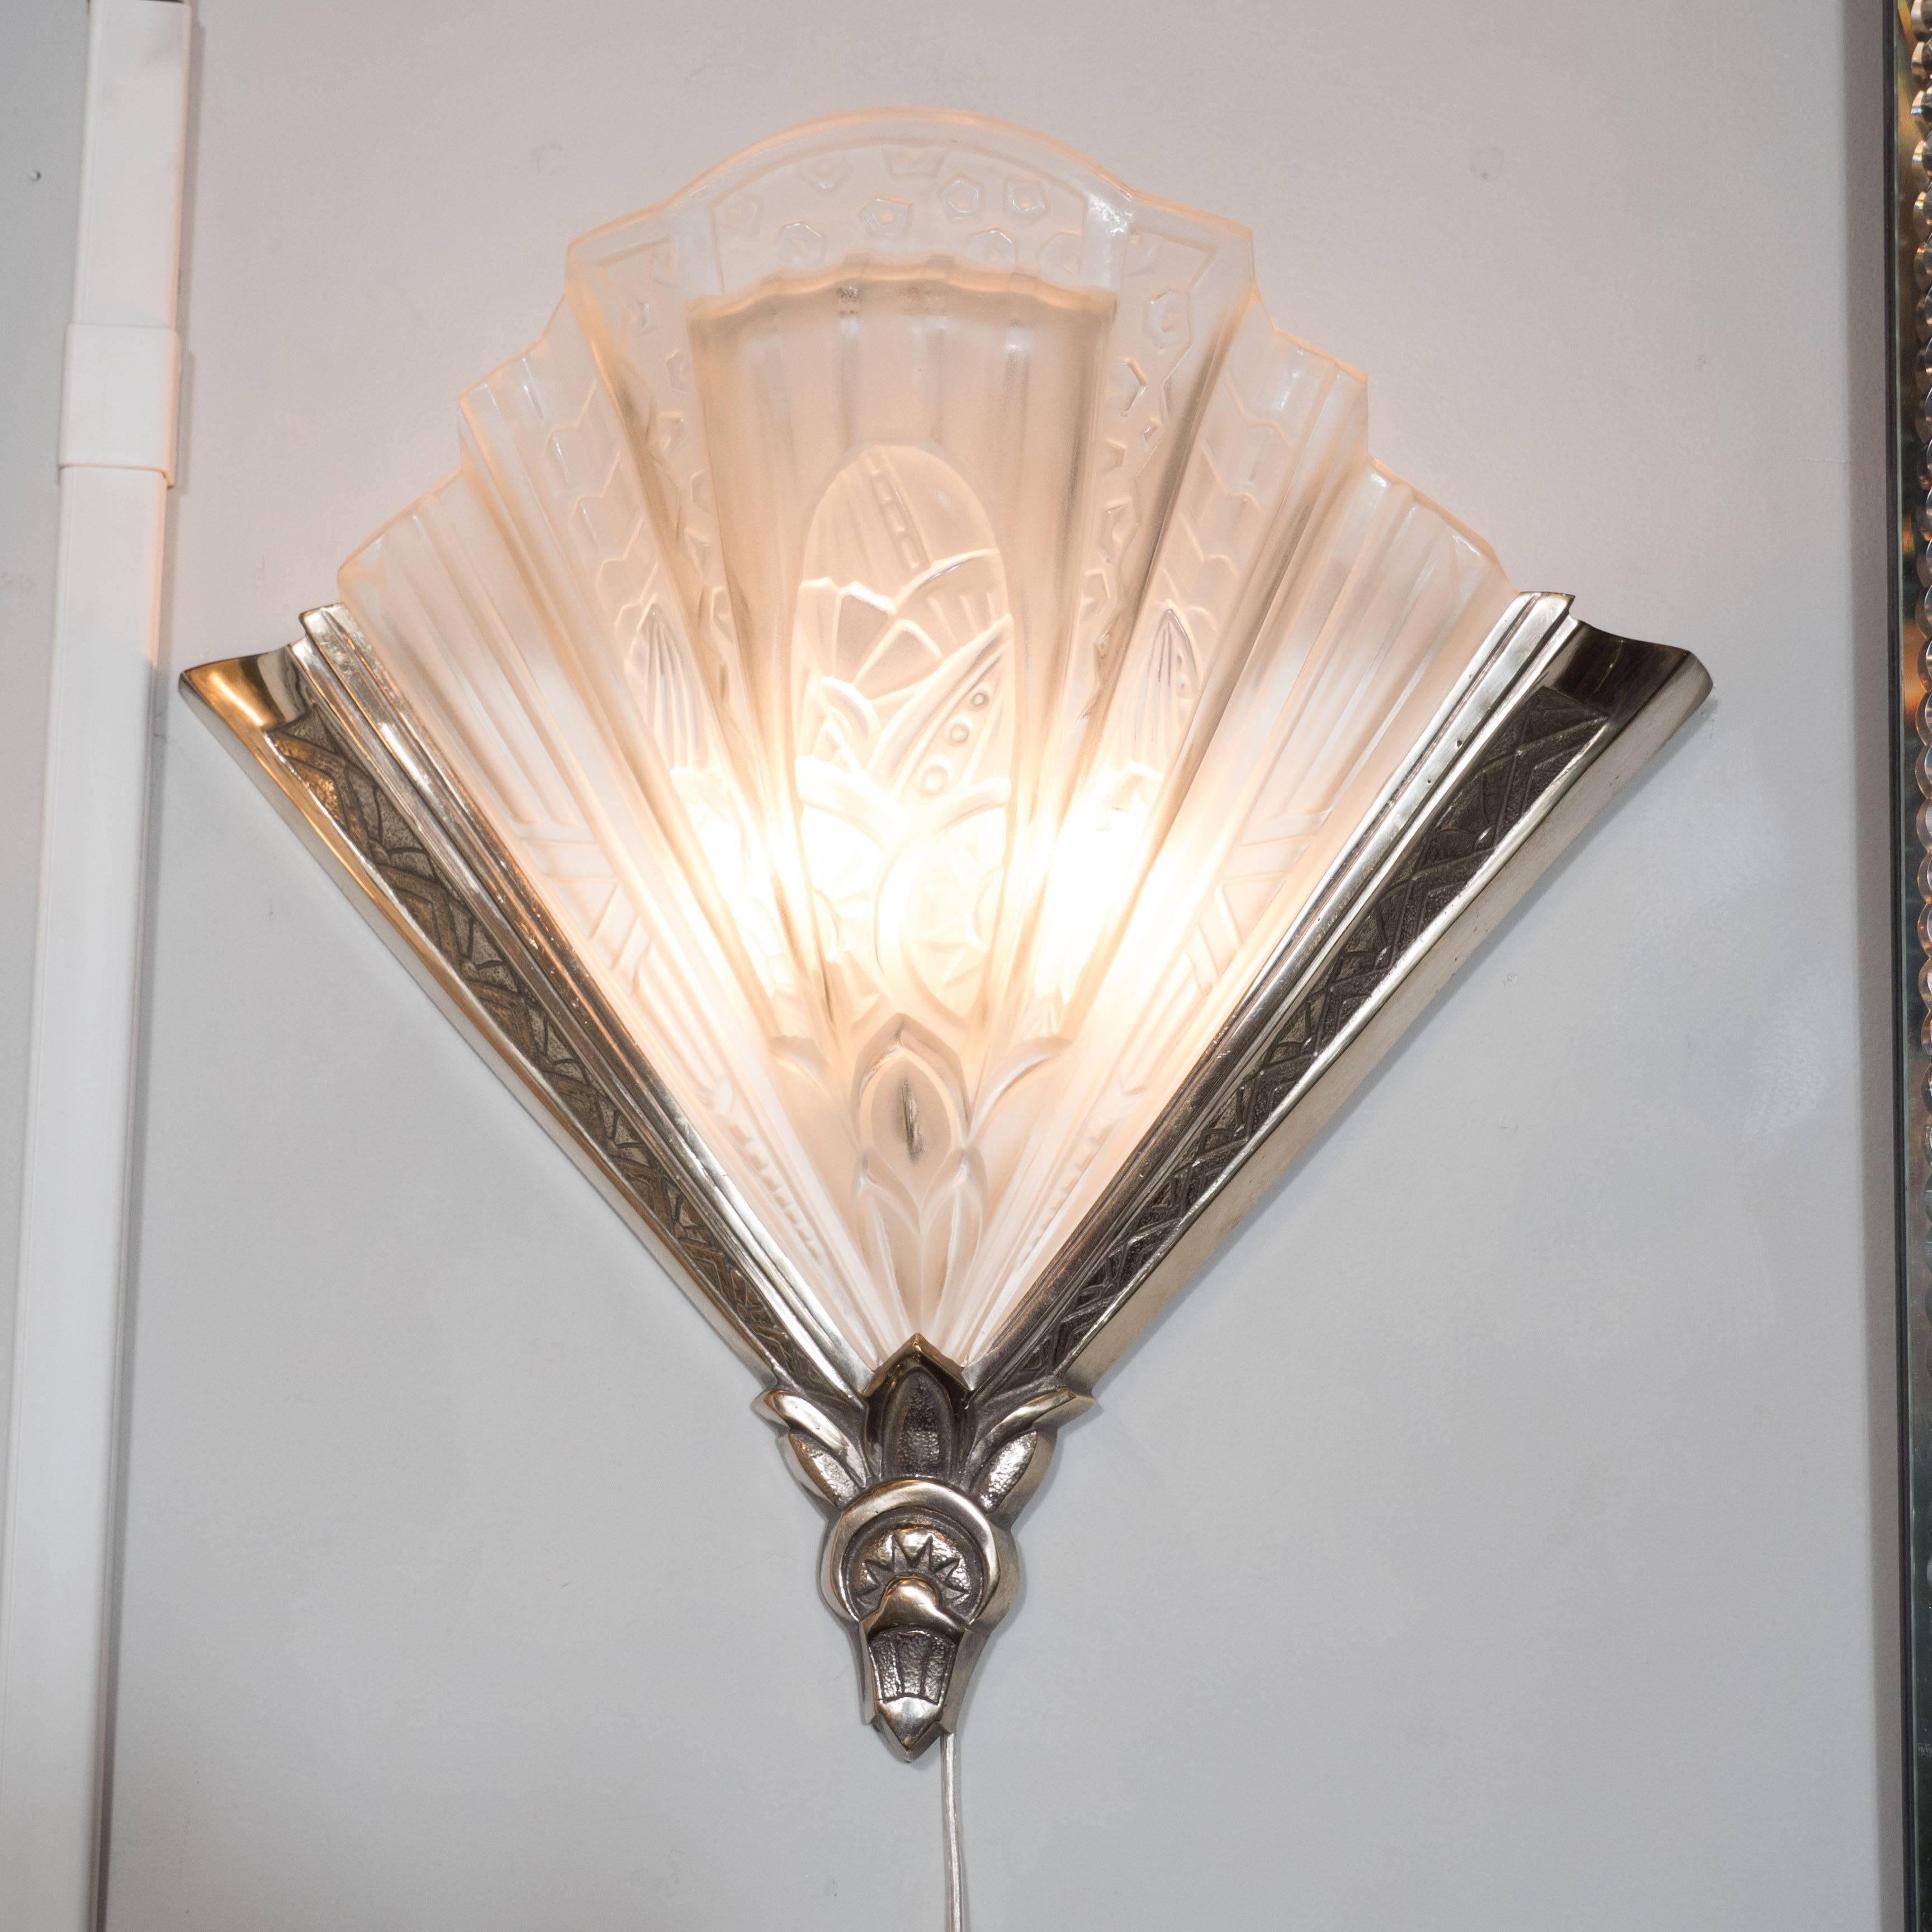 Mid-20th Century Set of Four Art Deco Sconces in Frosted Glass and Nickel, Signed Frontisi